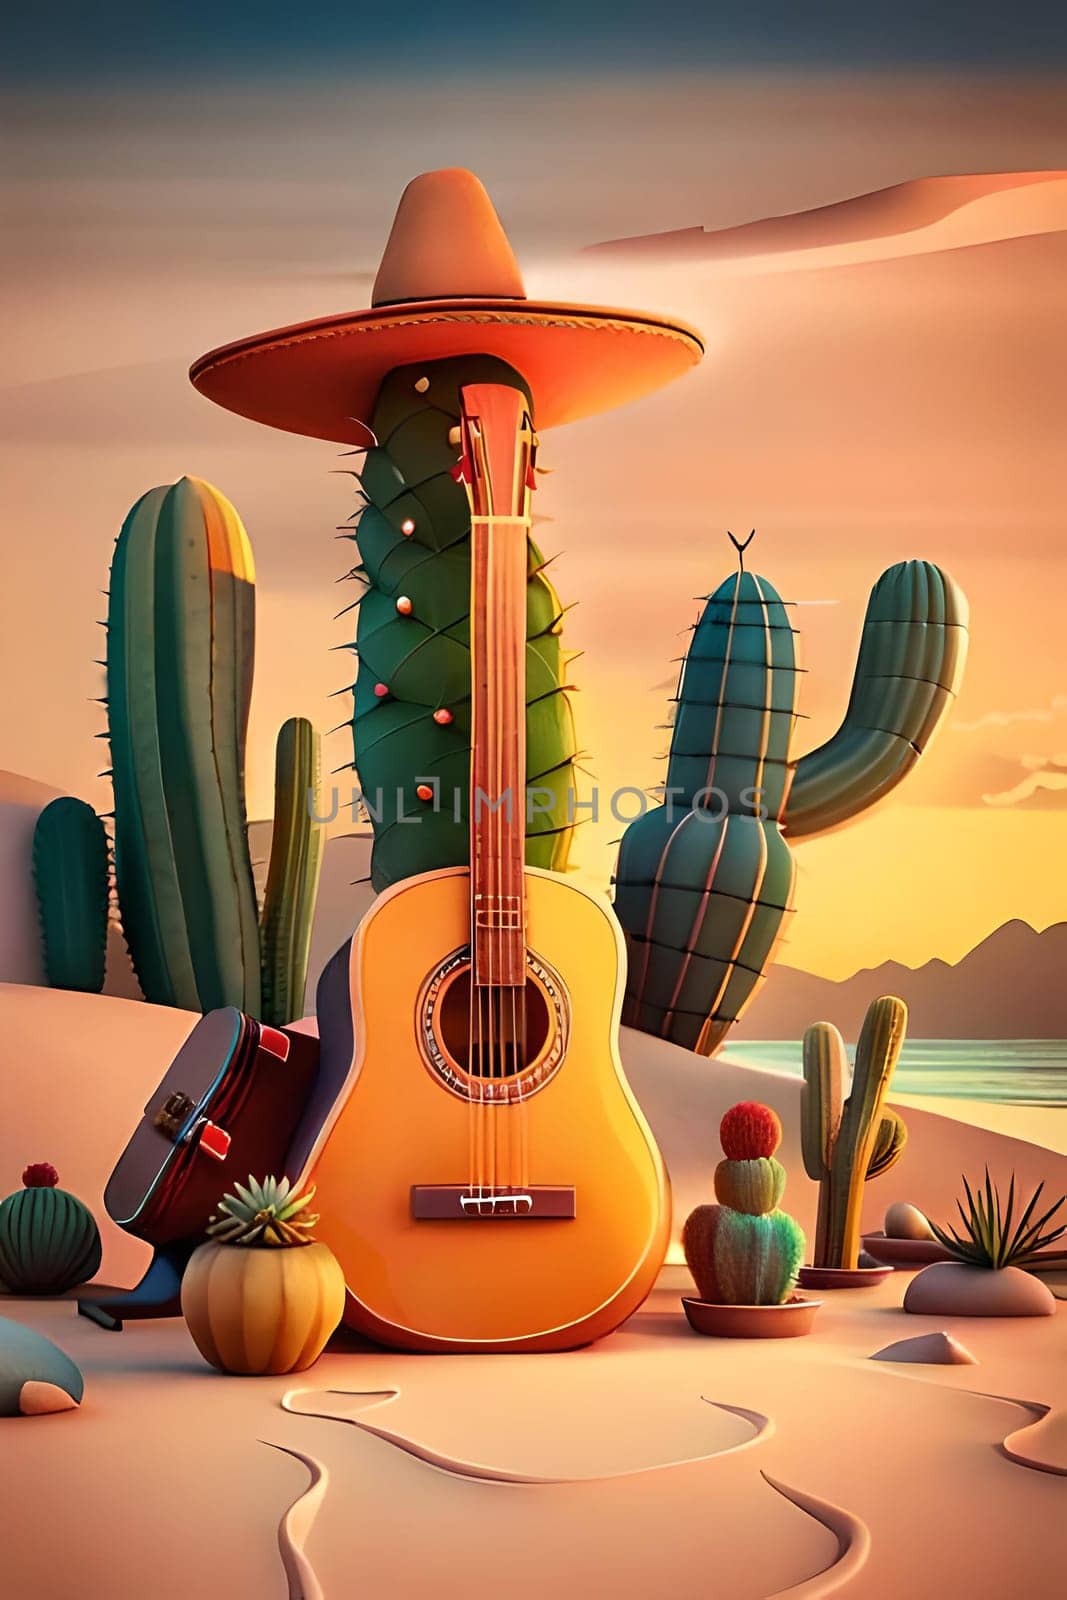 Festive card for Junina festival - whimsical cactus in a hat and flowers. banner, copy space. illustration created by Generative AI